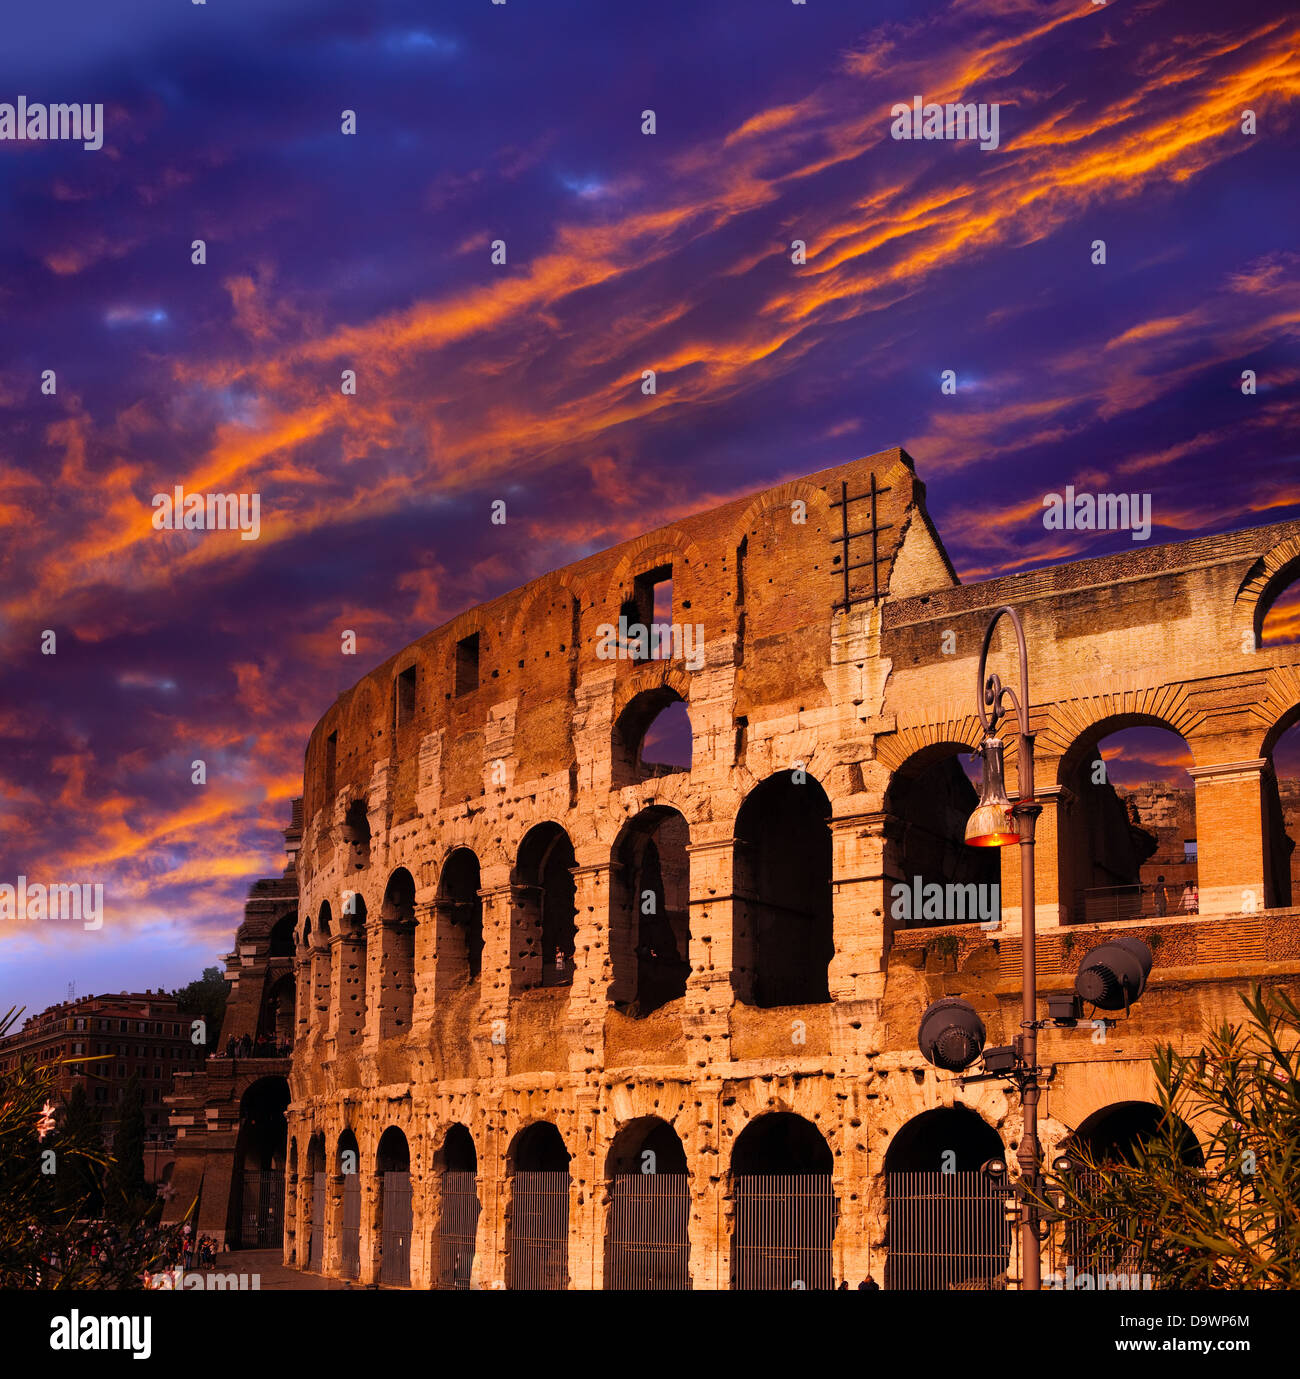 Bright crimson sunset over the ancient Colosseum. Rome. Italy Stock Photo